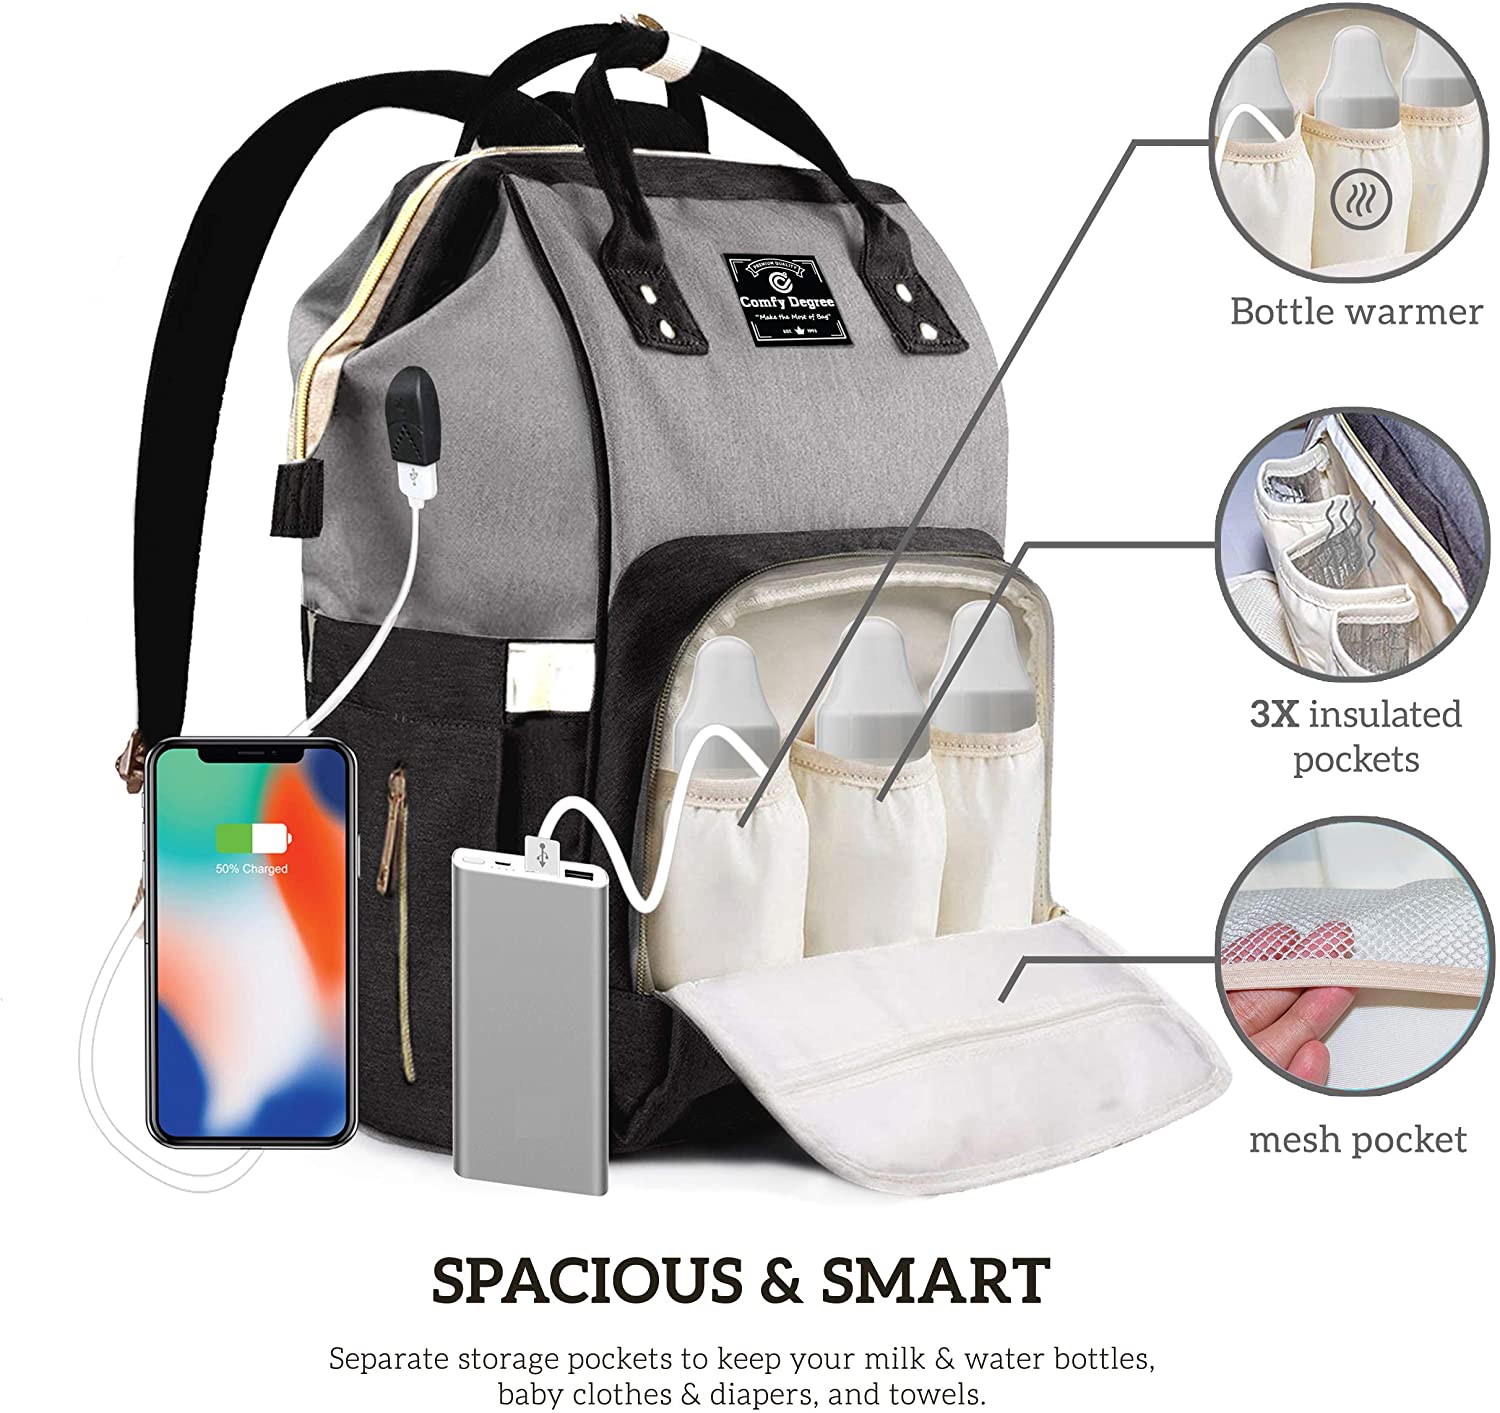 Large Baby Multifunction Waterproof Fabric Travel Nappy Changing Backpack with USB Charging Port and Insulated Bottle Warmer Pockets for Mom and Dad Black - Gray ComfyDegree Diaper Bag Backpack